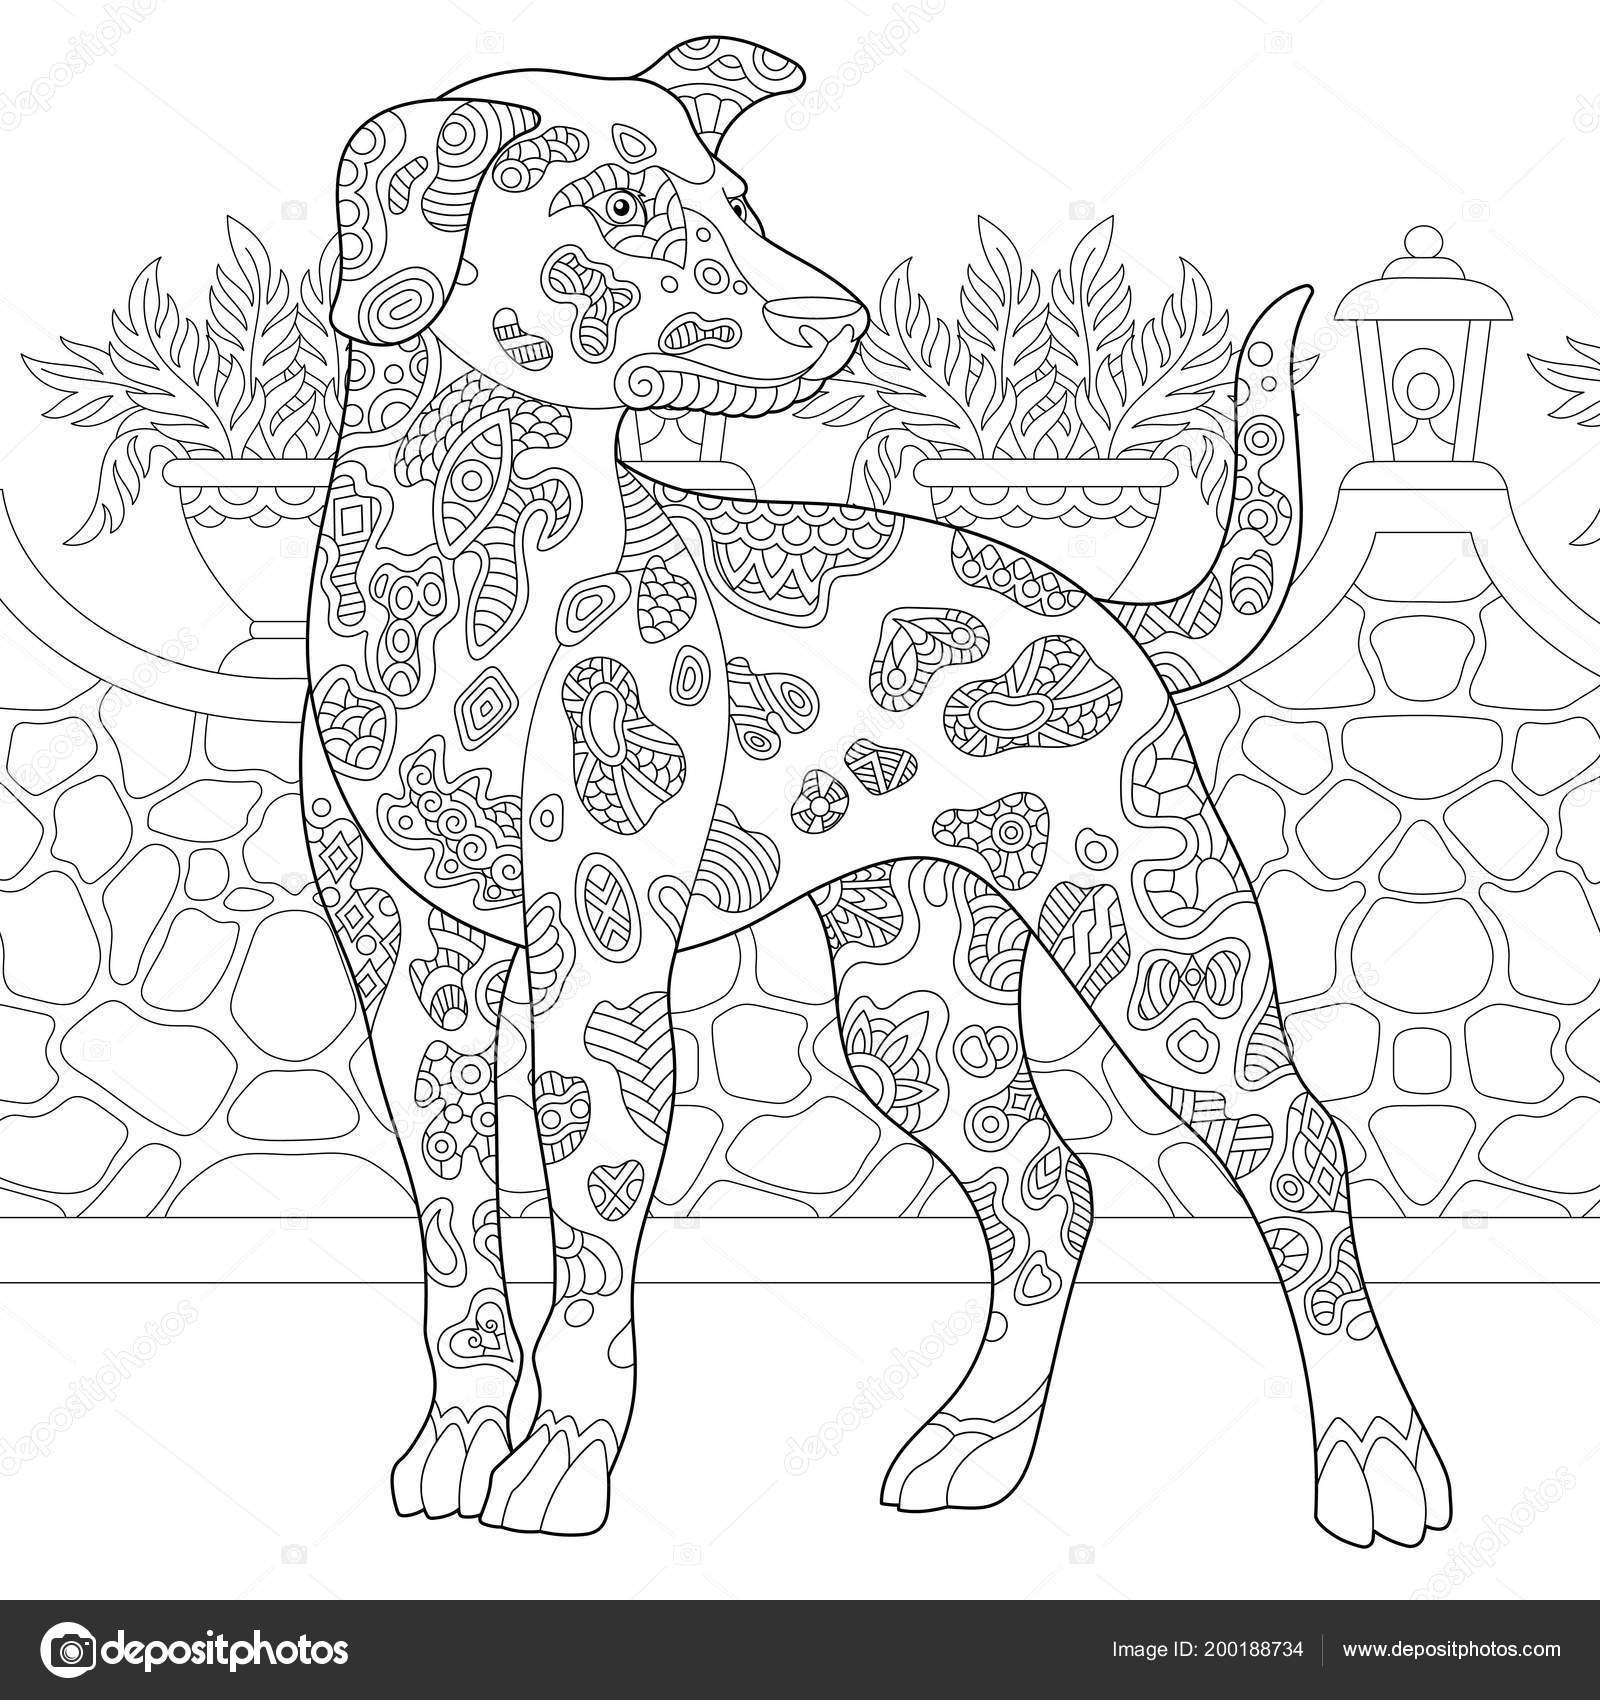 Dalmatian dog coloring page colouring picture adult coloring book idea stock vector by sybirko